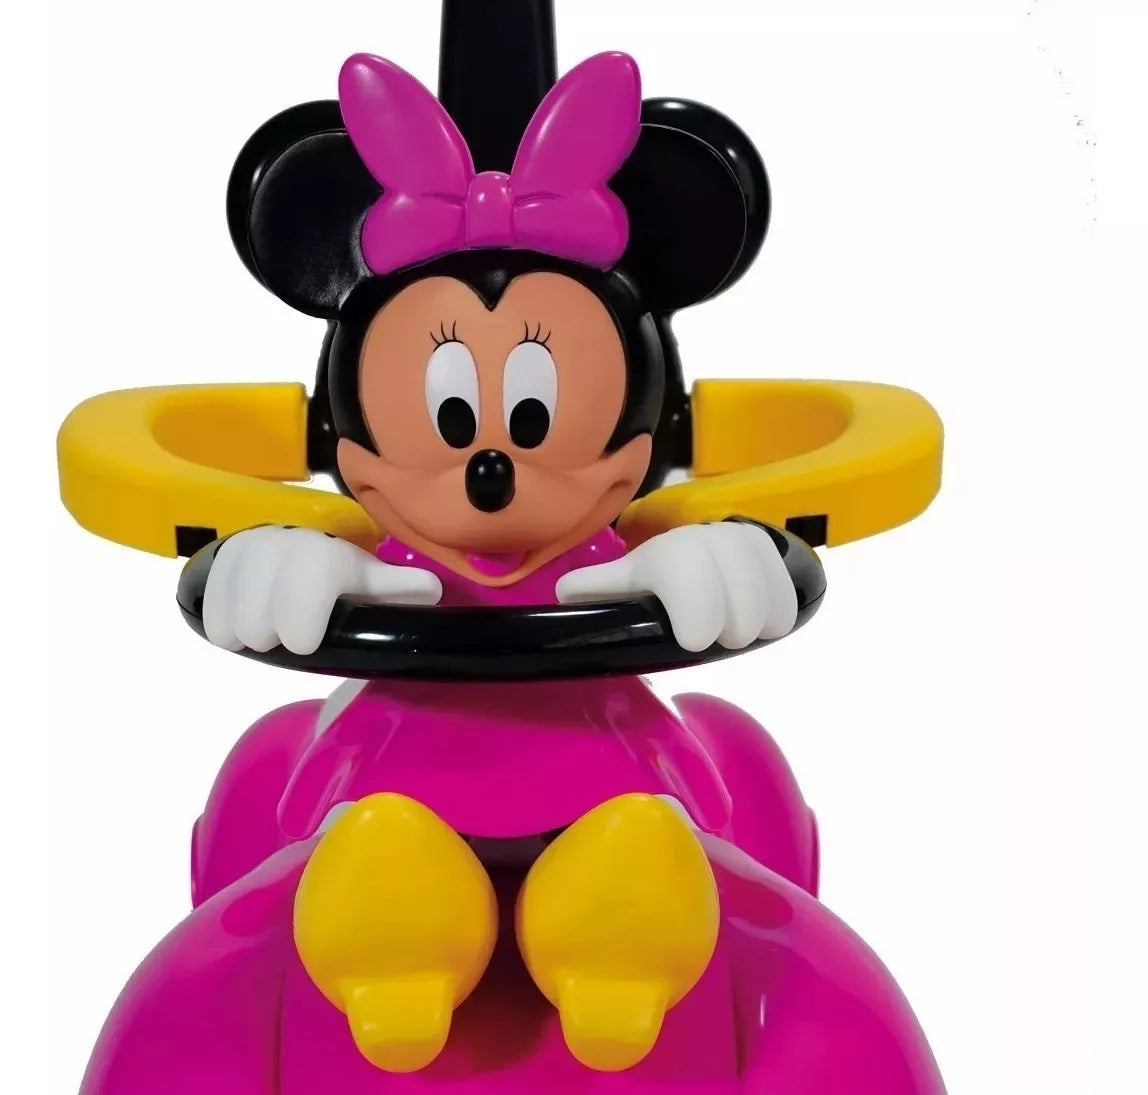 Disney Push Car With Hand - Minnie Mouse